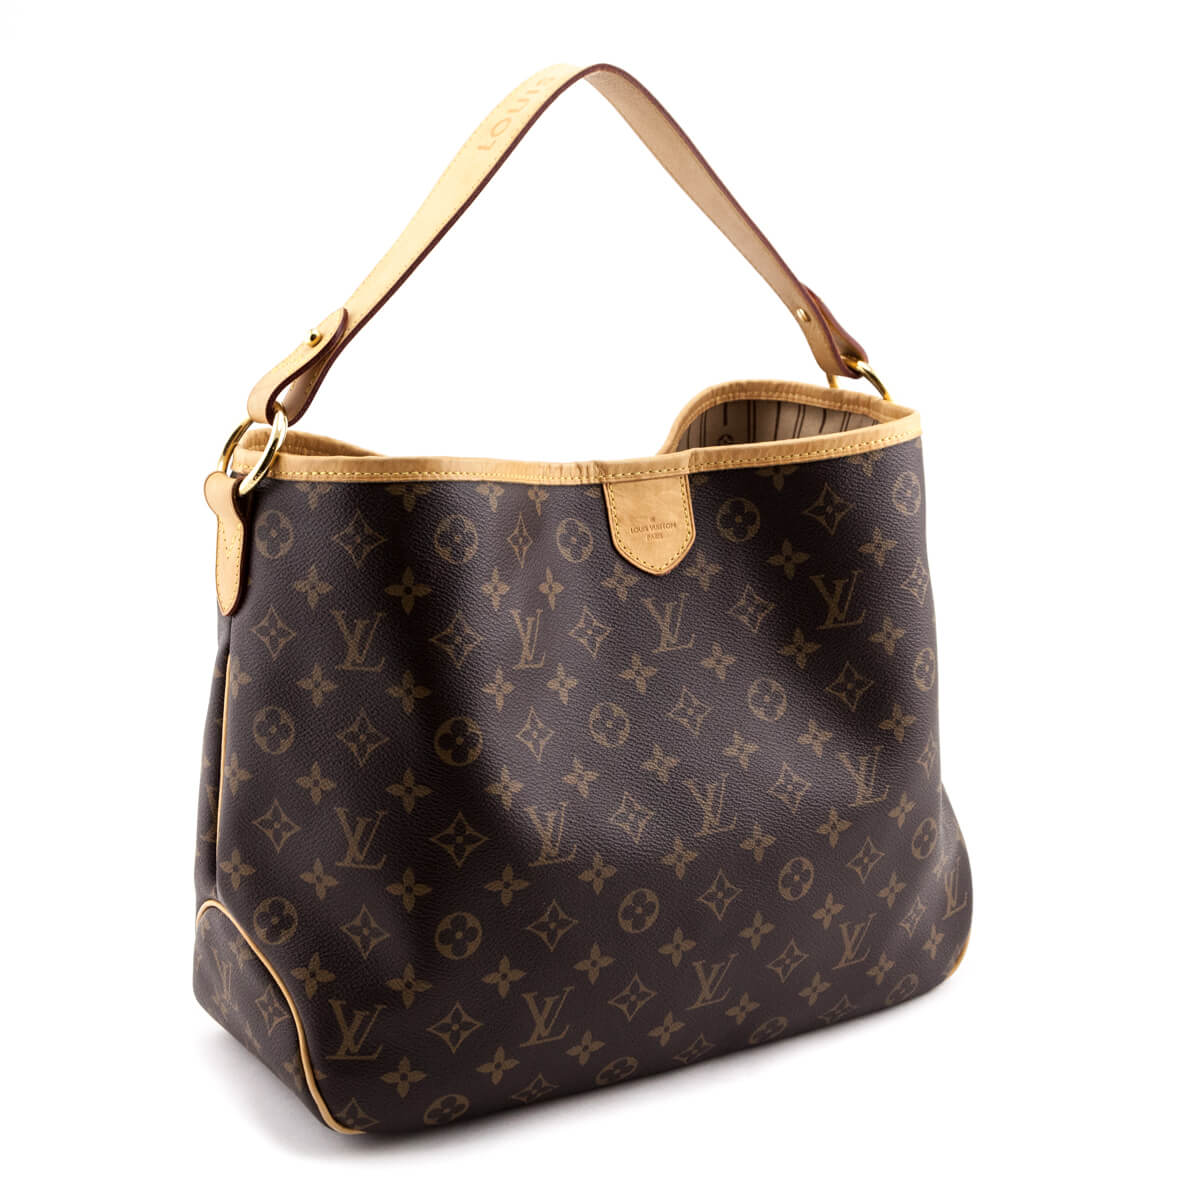 Buy Pre-owned & Brand new Luxury Louis Vuitton Monogram Canvas Delightful PM  Bag Online